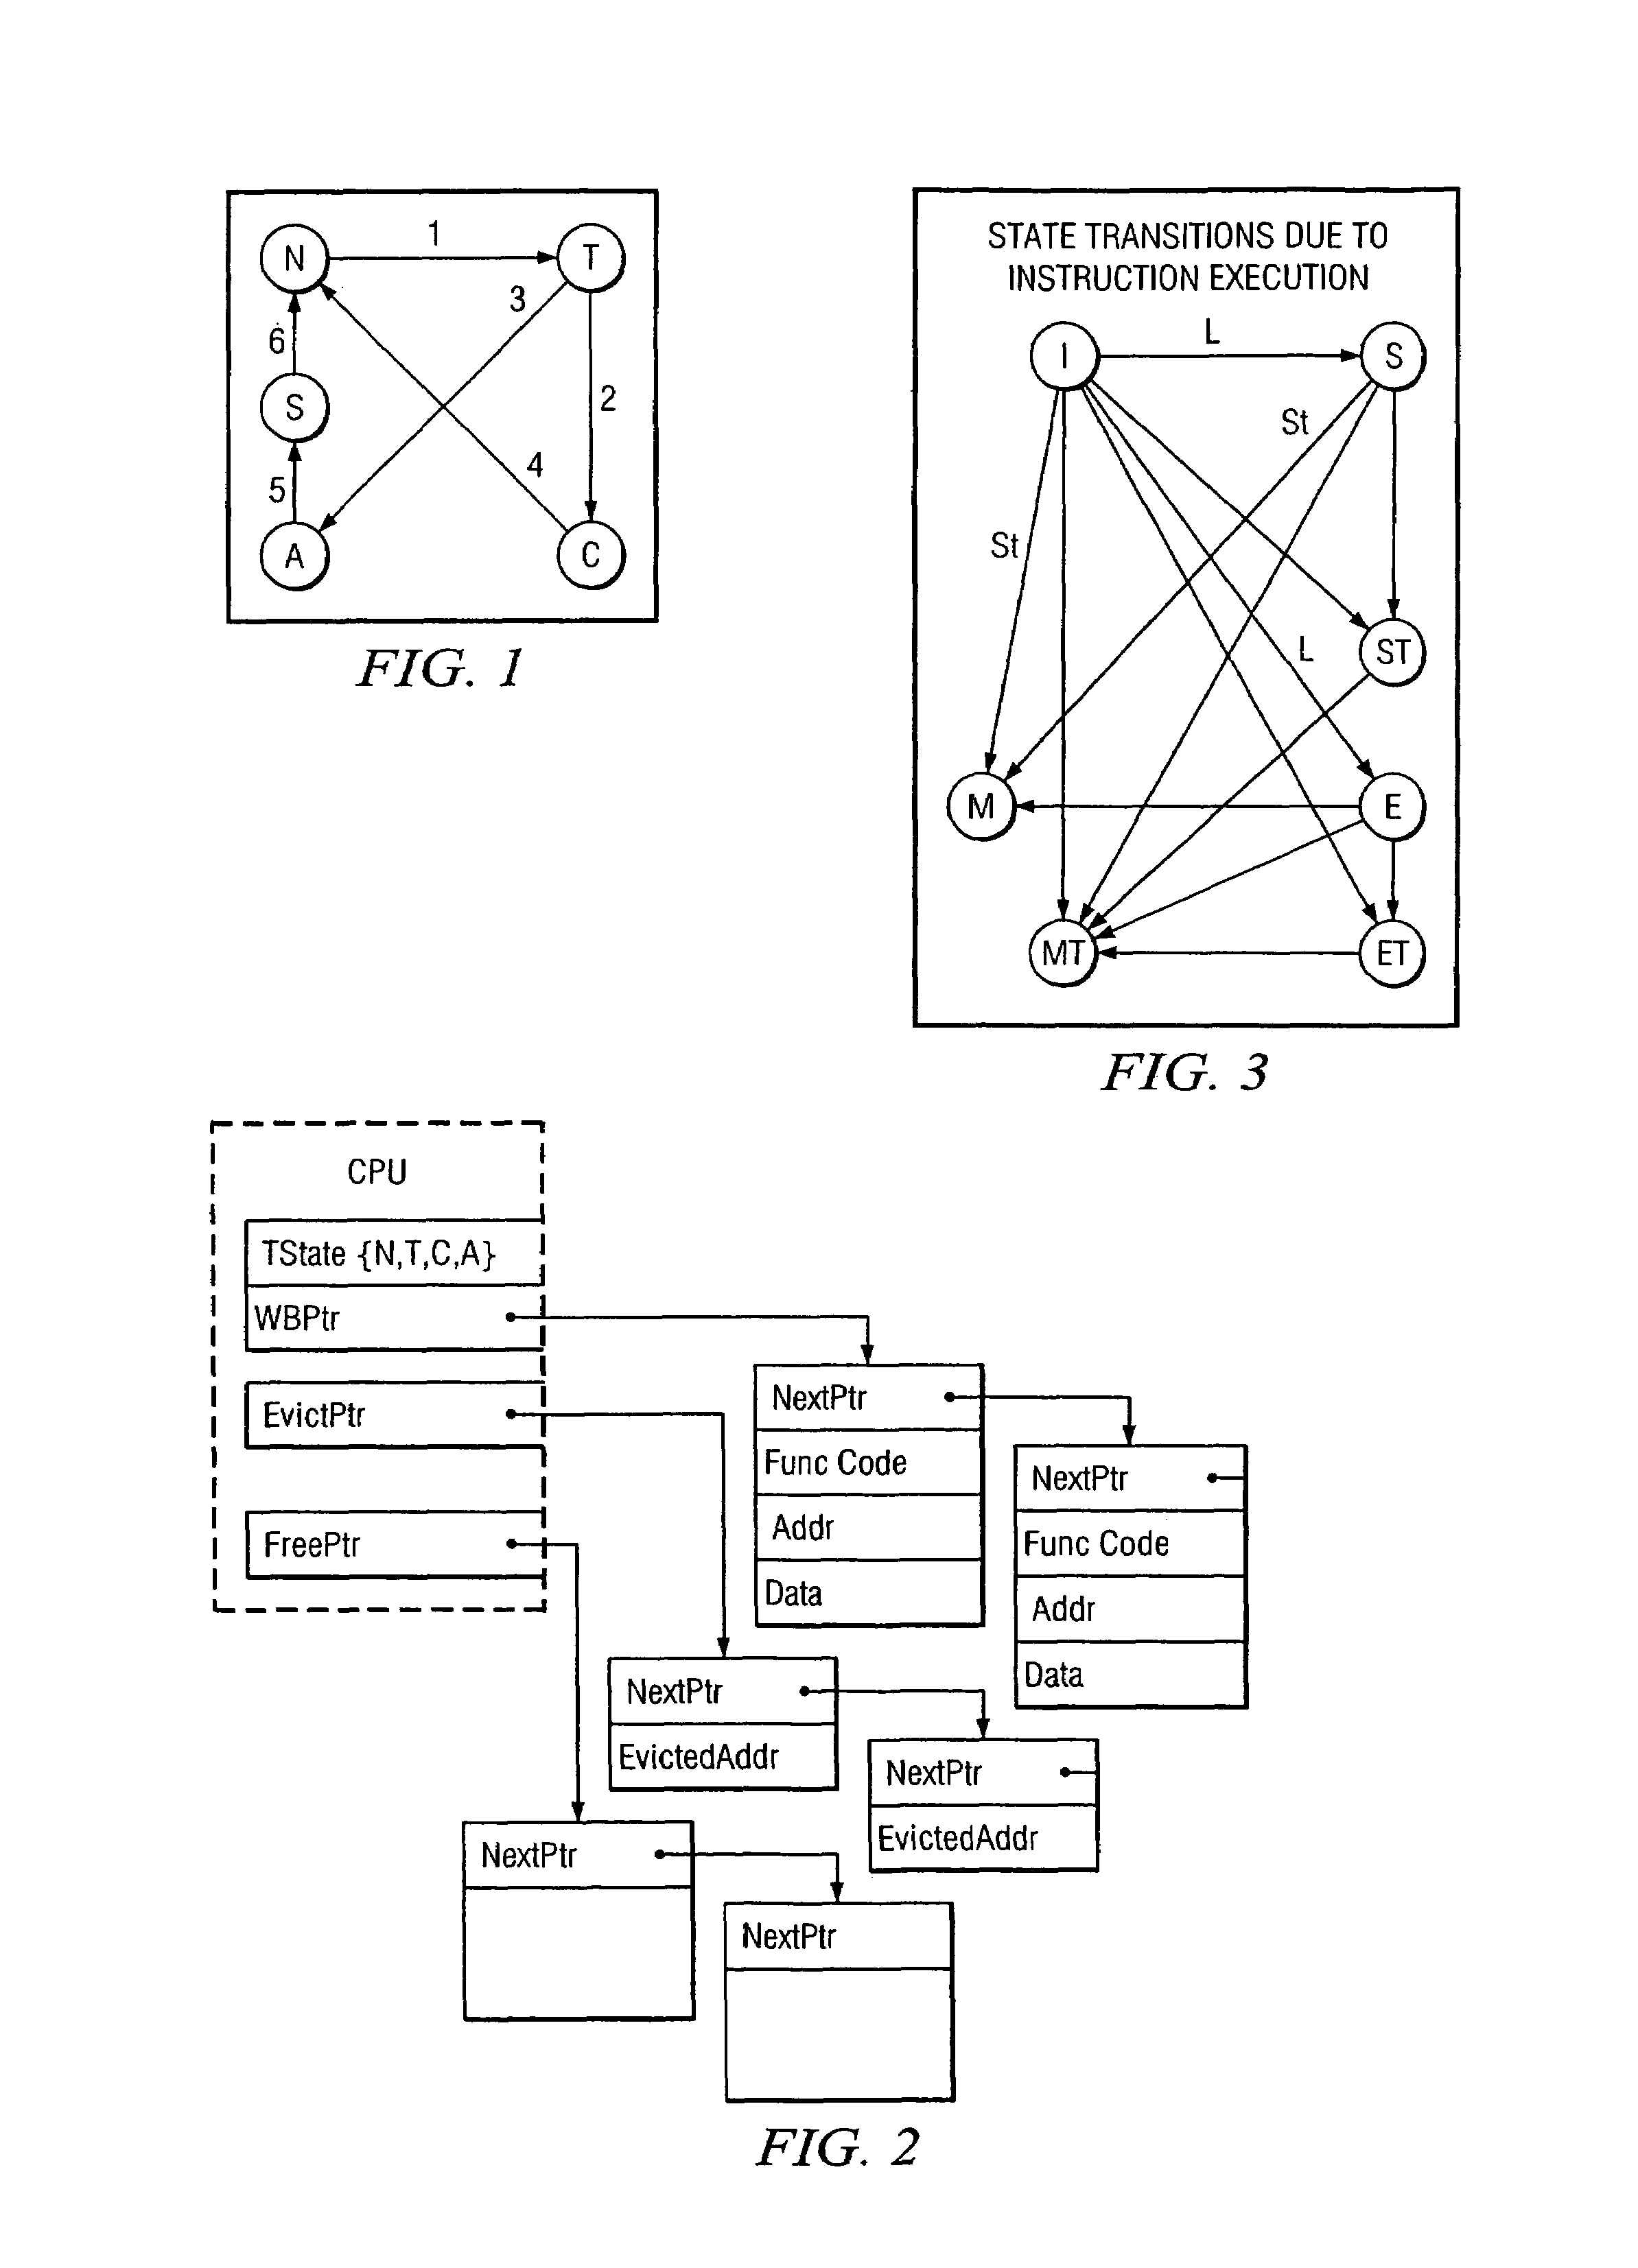 System and method for performing memory operations in a computing system